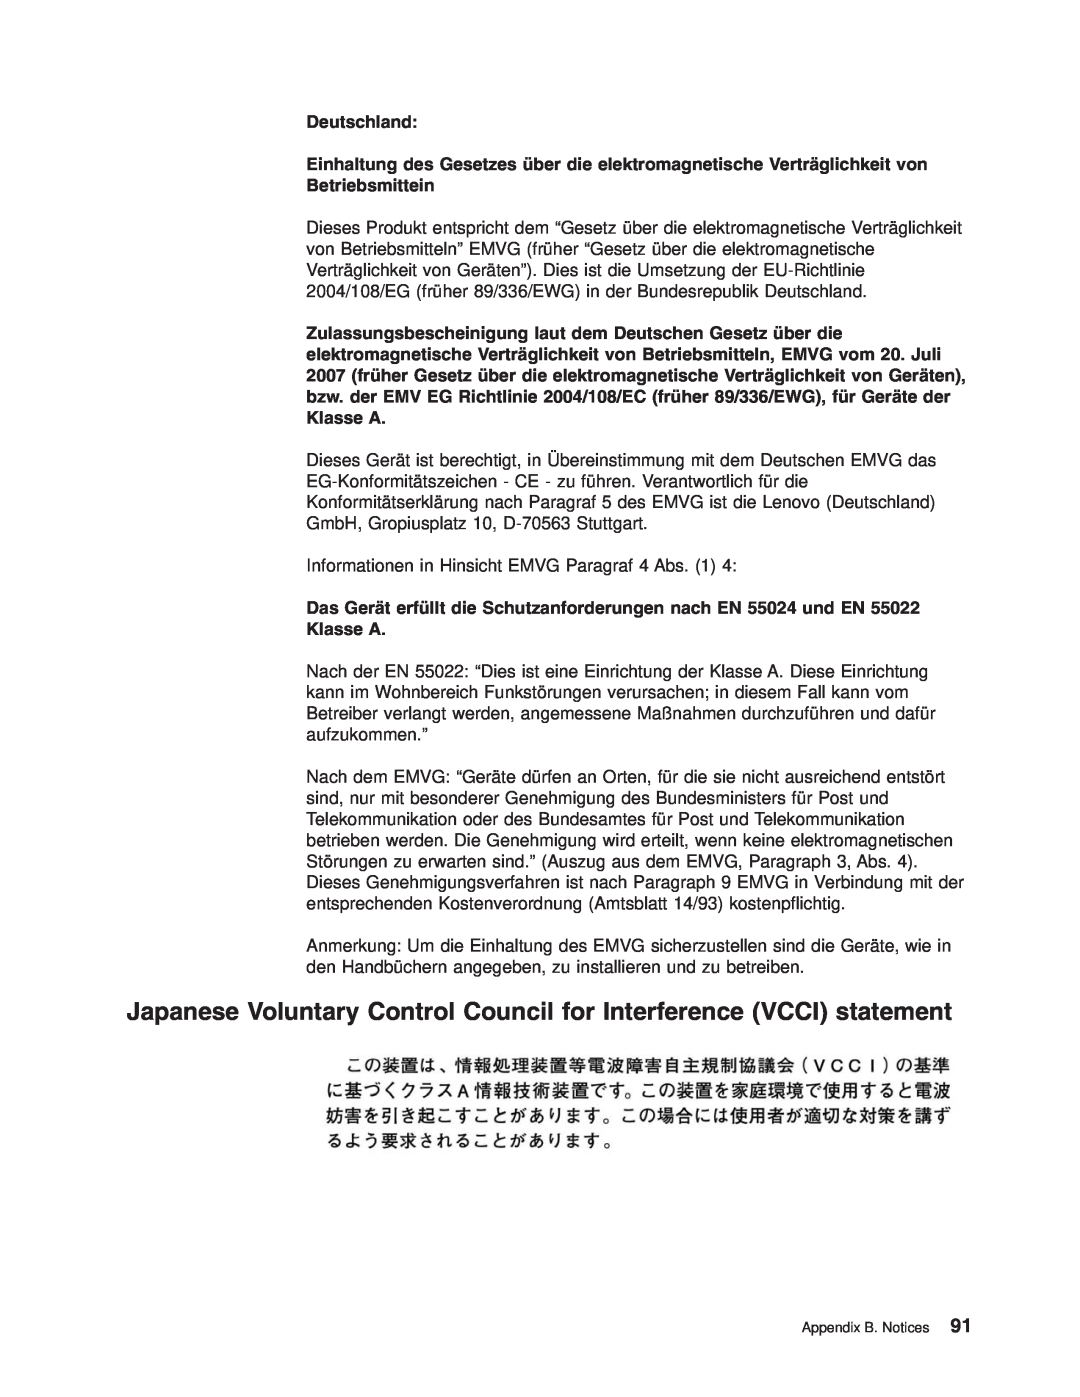 Lenovo 6446 Japanese Voluntary Control Council for Interference VCCI statement, Deutschland, Betriebsmittein, Klasse A 